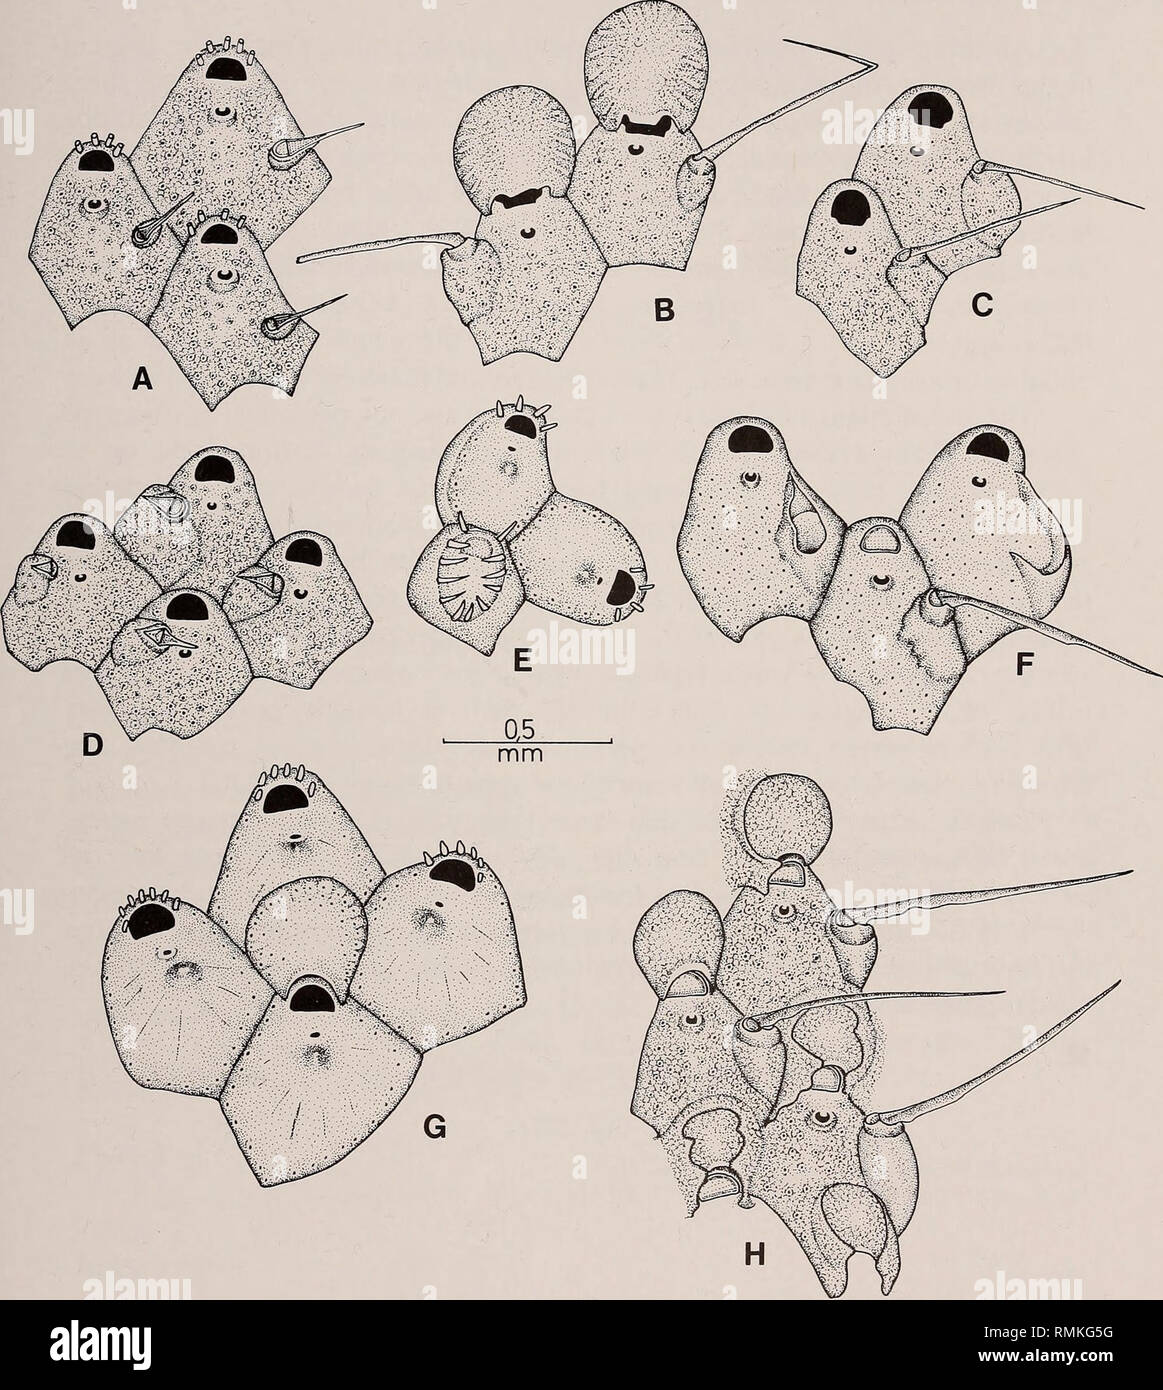 . Annals of the South African Museum = Annale van die Suid-Afrikaanse Museum. Natural history. THE SOUTH AFRICAN MUSEUM'S MEIRING NAUDE CRUISES 83. Fig. 20. A. Microporella sp. B-C. Flustramorpha marginata (Krauss). B. Ovicelled zooids. C. Young zooids, showing shape of primary orifice. D. Flustramorpha flabellaris (Busk). E. Fenestrulina indigena sp. nov., ancestrula and first two zooids. F. Flustramorpha angusta Hayward &amp; Cook, young zooids showing shape of primary orifice. G. Fenestrulina indigena sp. nov., a group of zooids from close to the colony edge. H. Flustramorpha angusta Haywar Stock Photo